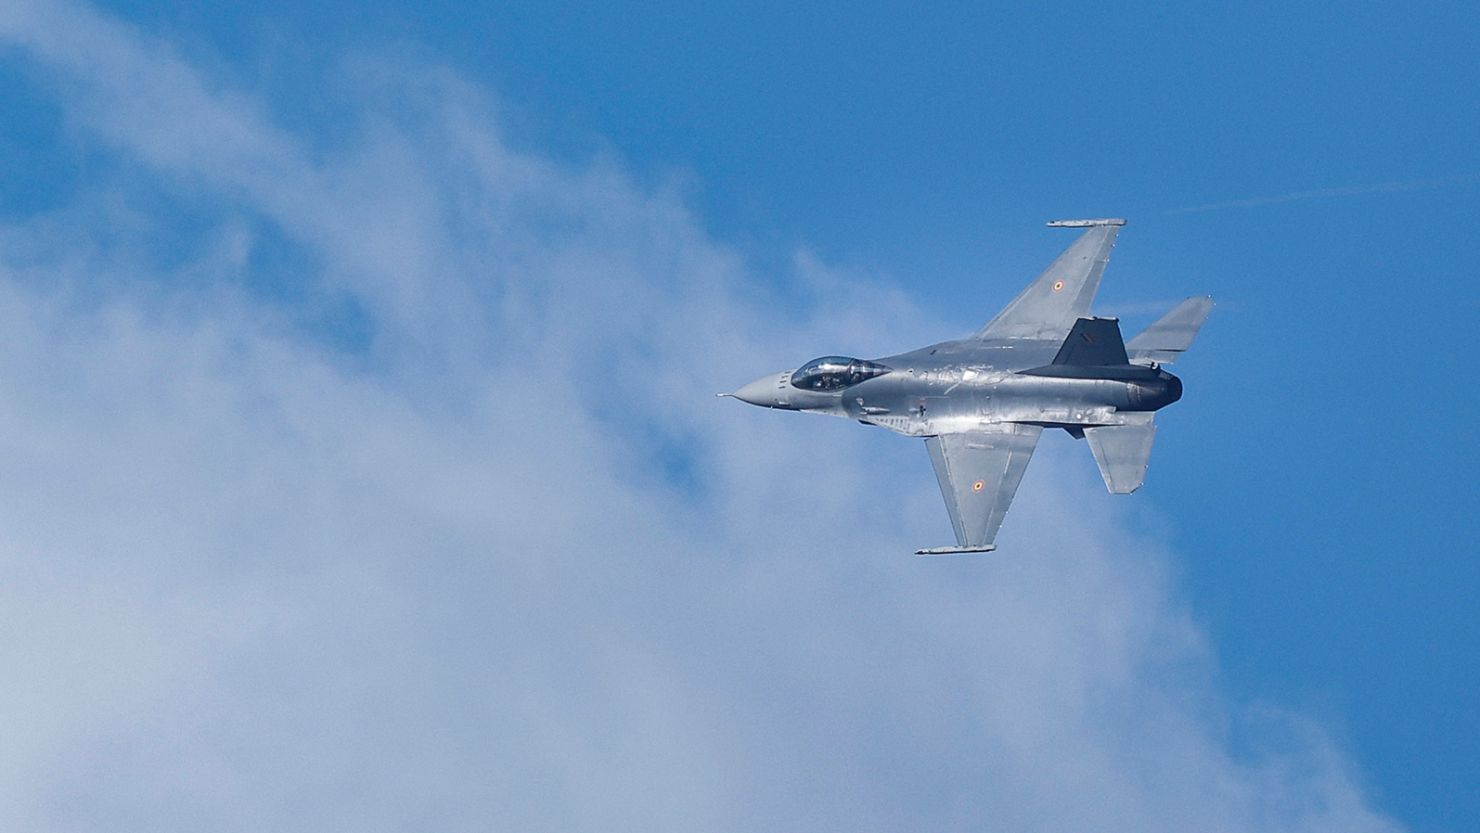 A Belgian F-16 jet fighter takes part in the NATO Air Nuclear drill "Steadfast Noon" on October 18, 2022. 